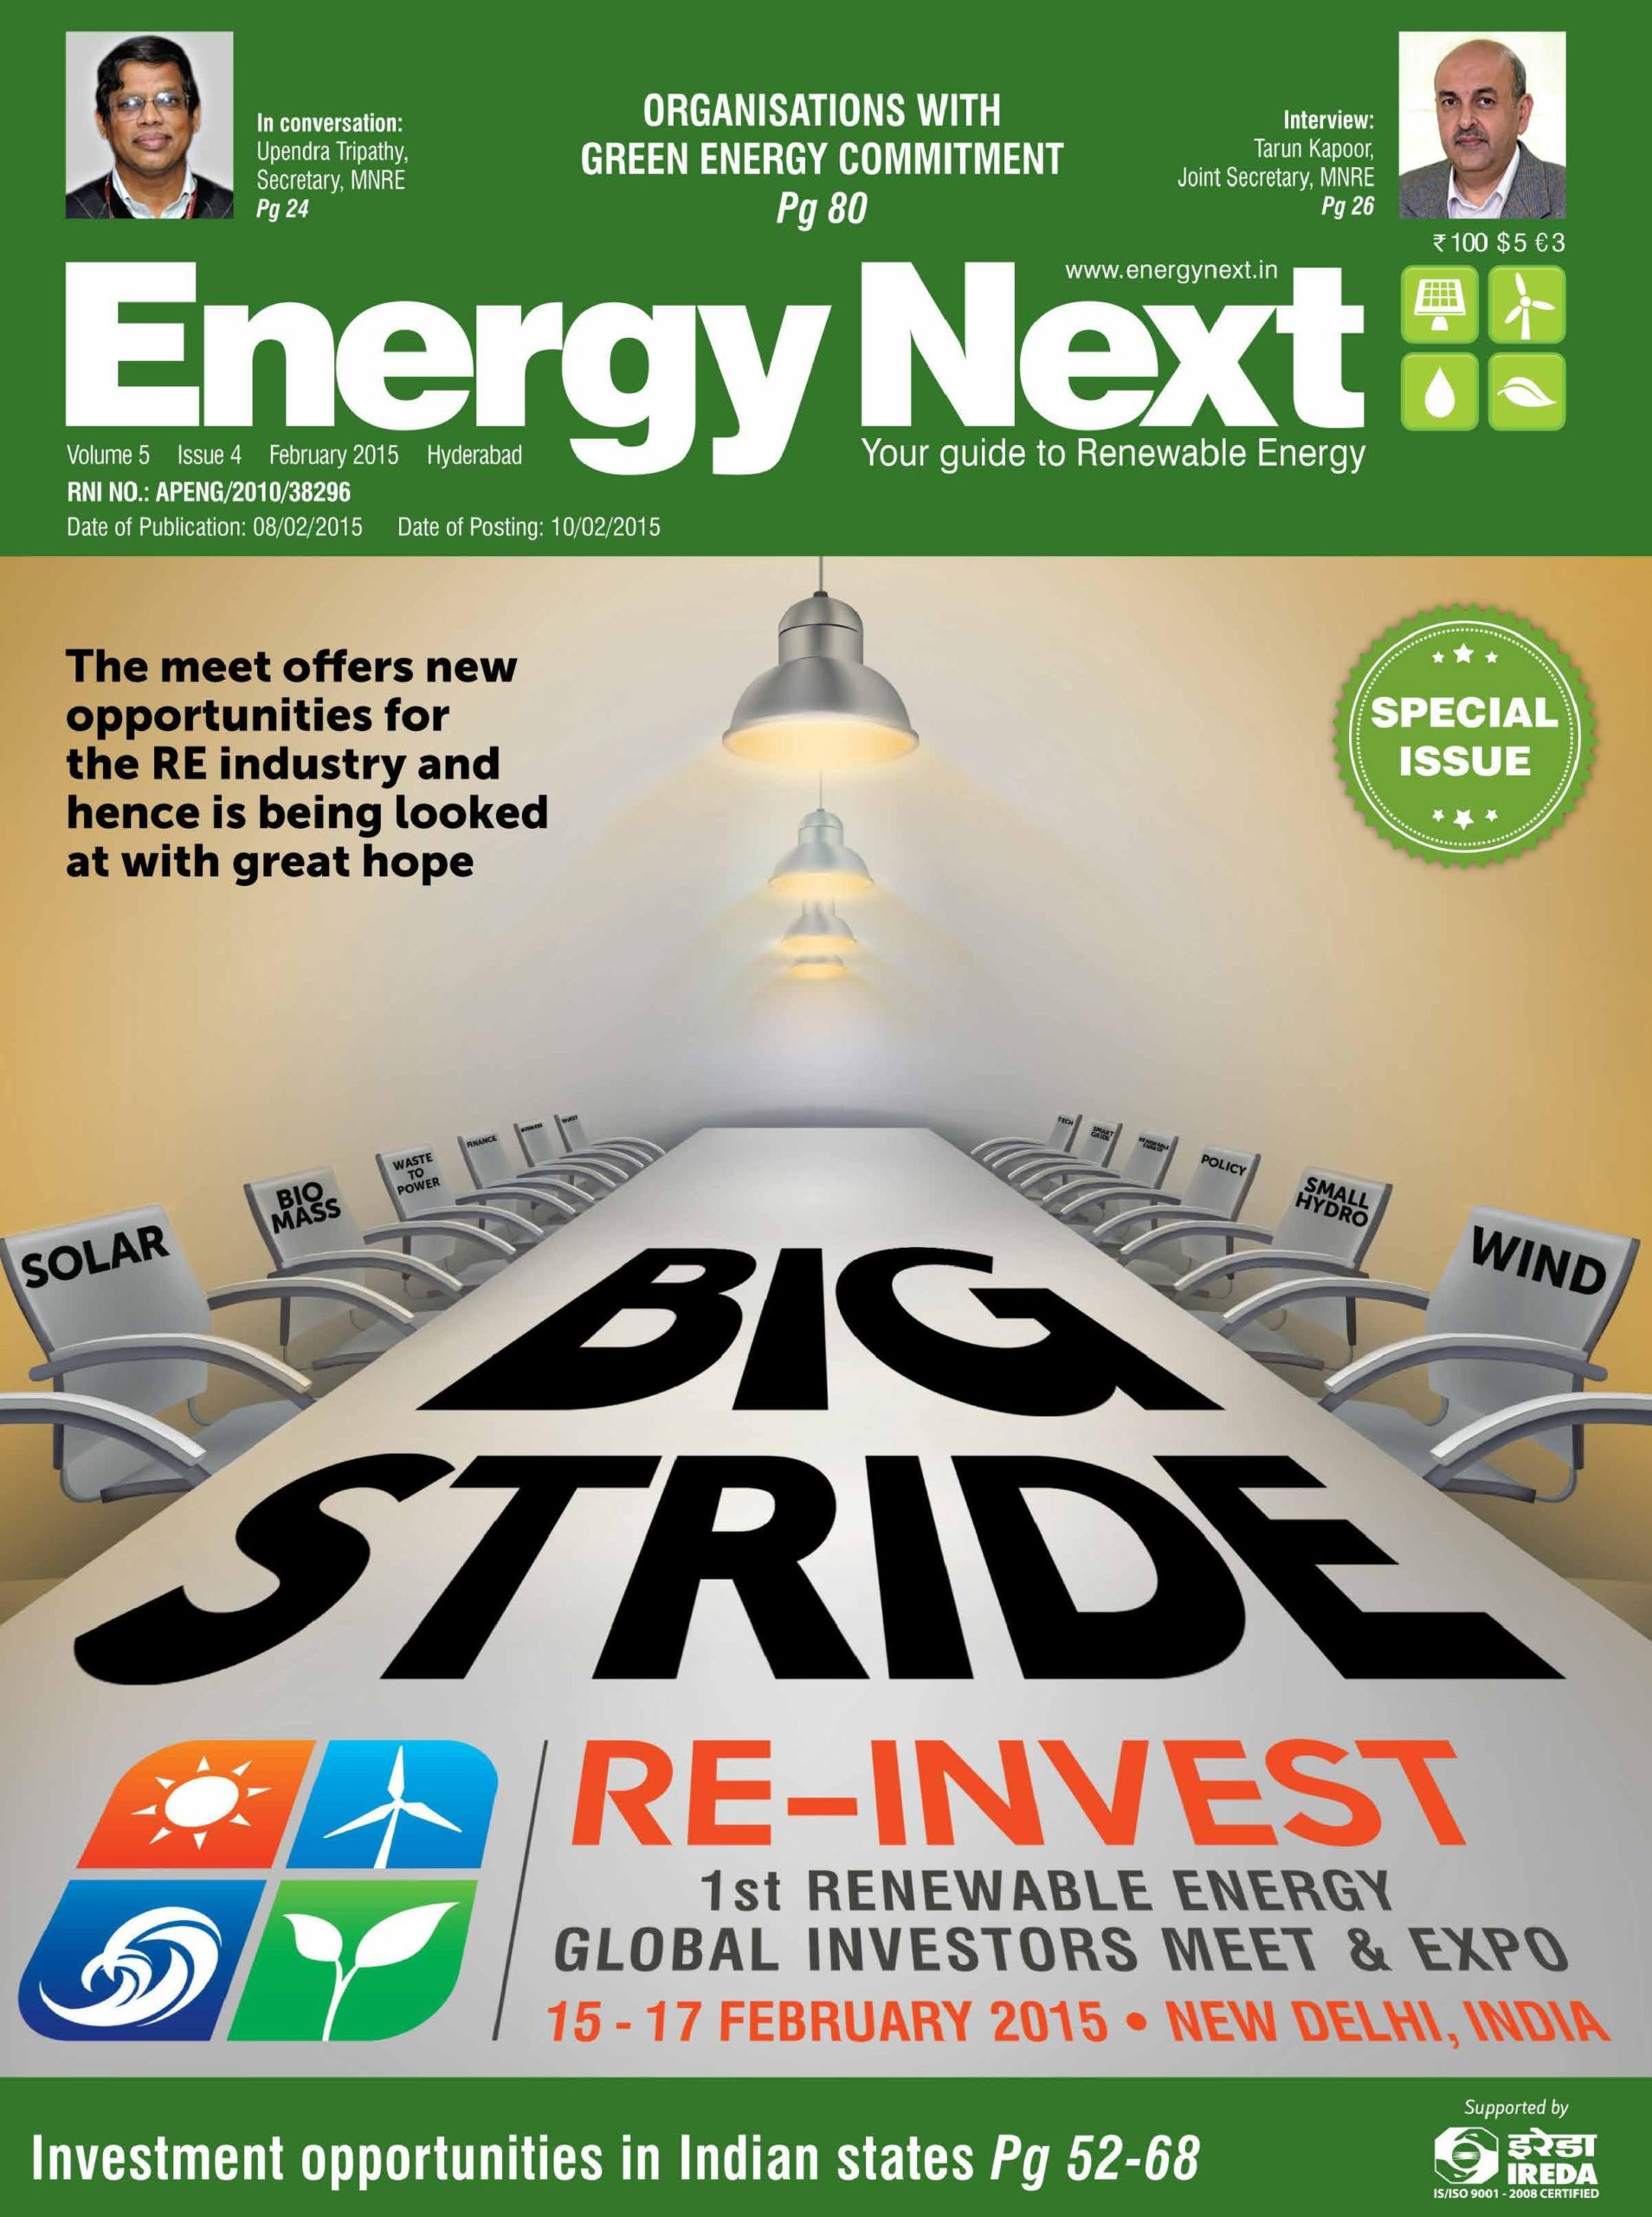 EnergyNext Vol 05 issue 4 Feb 2015 scaled